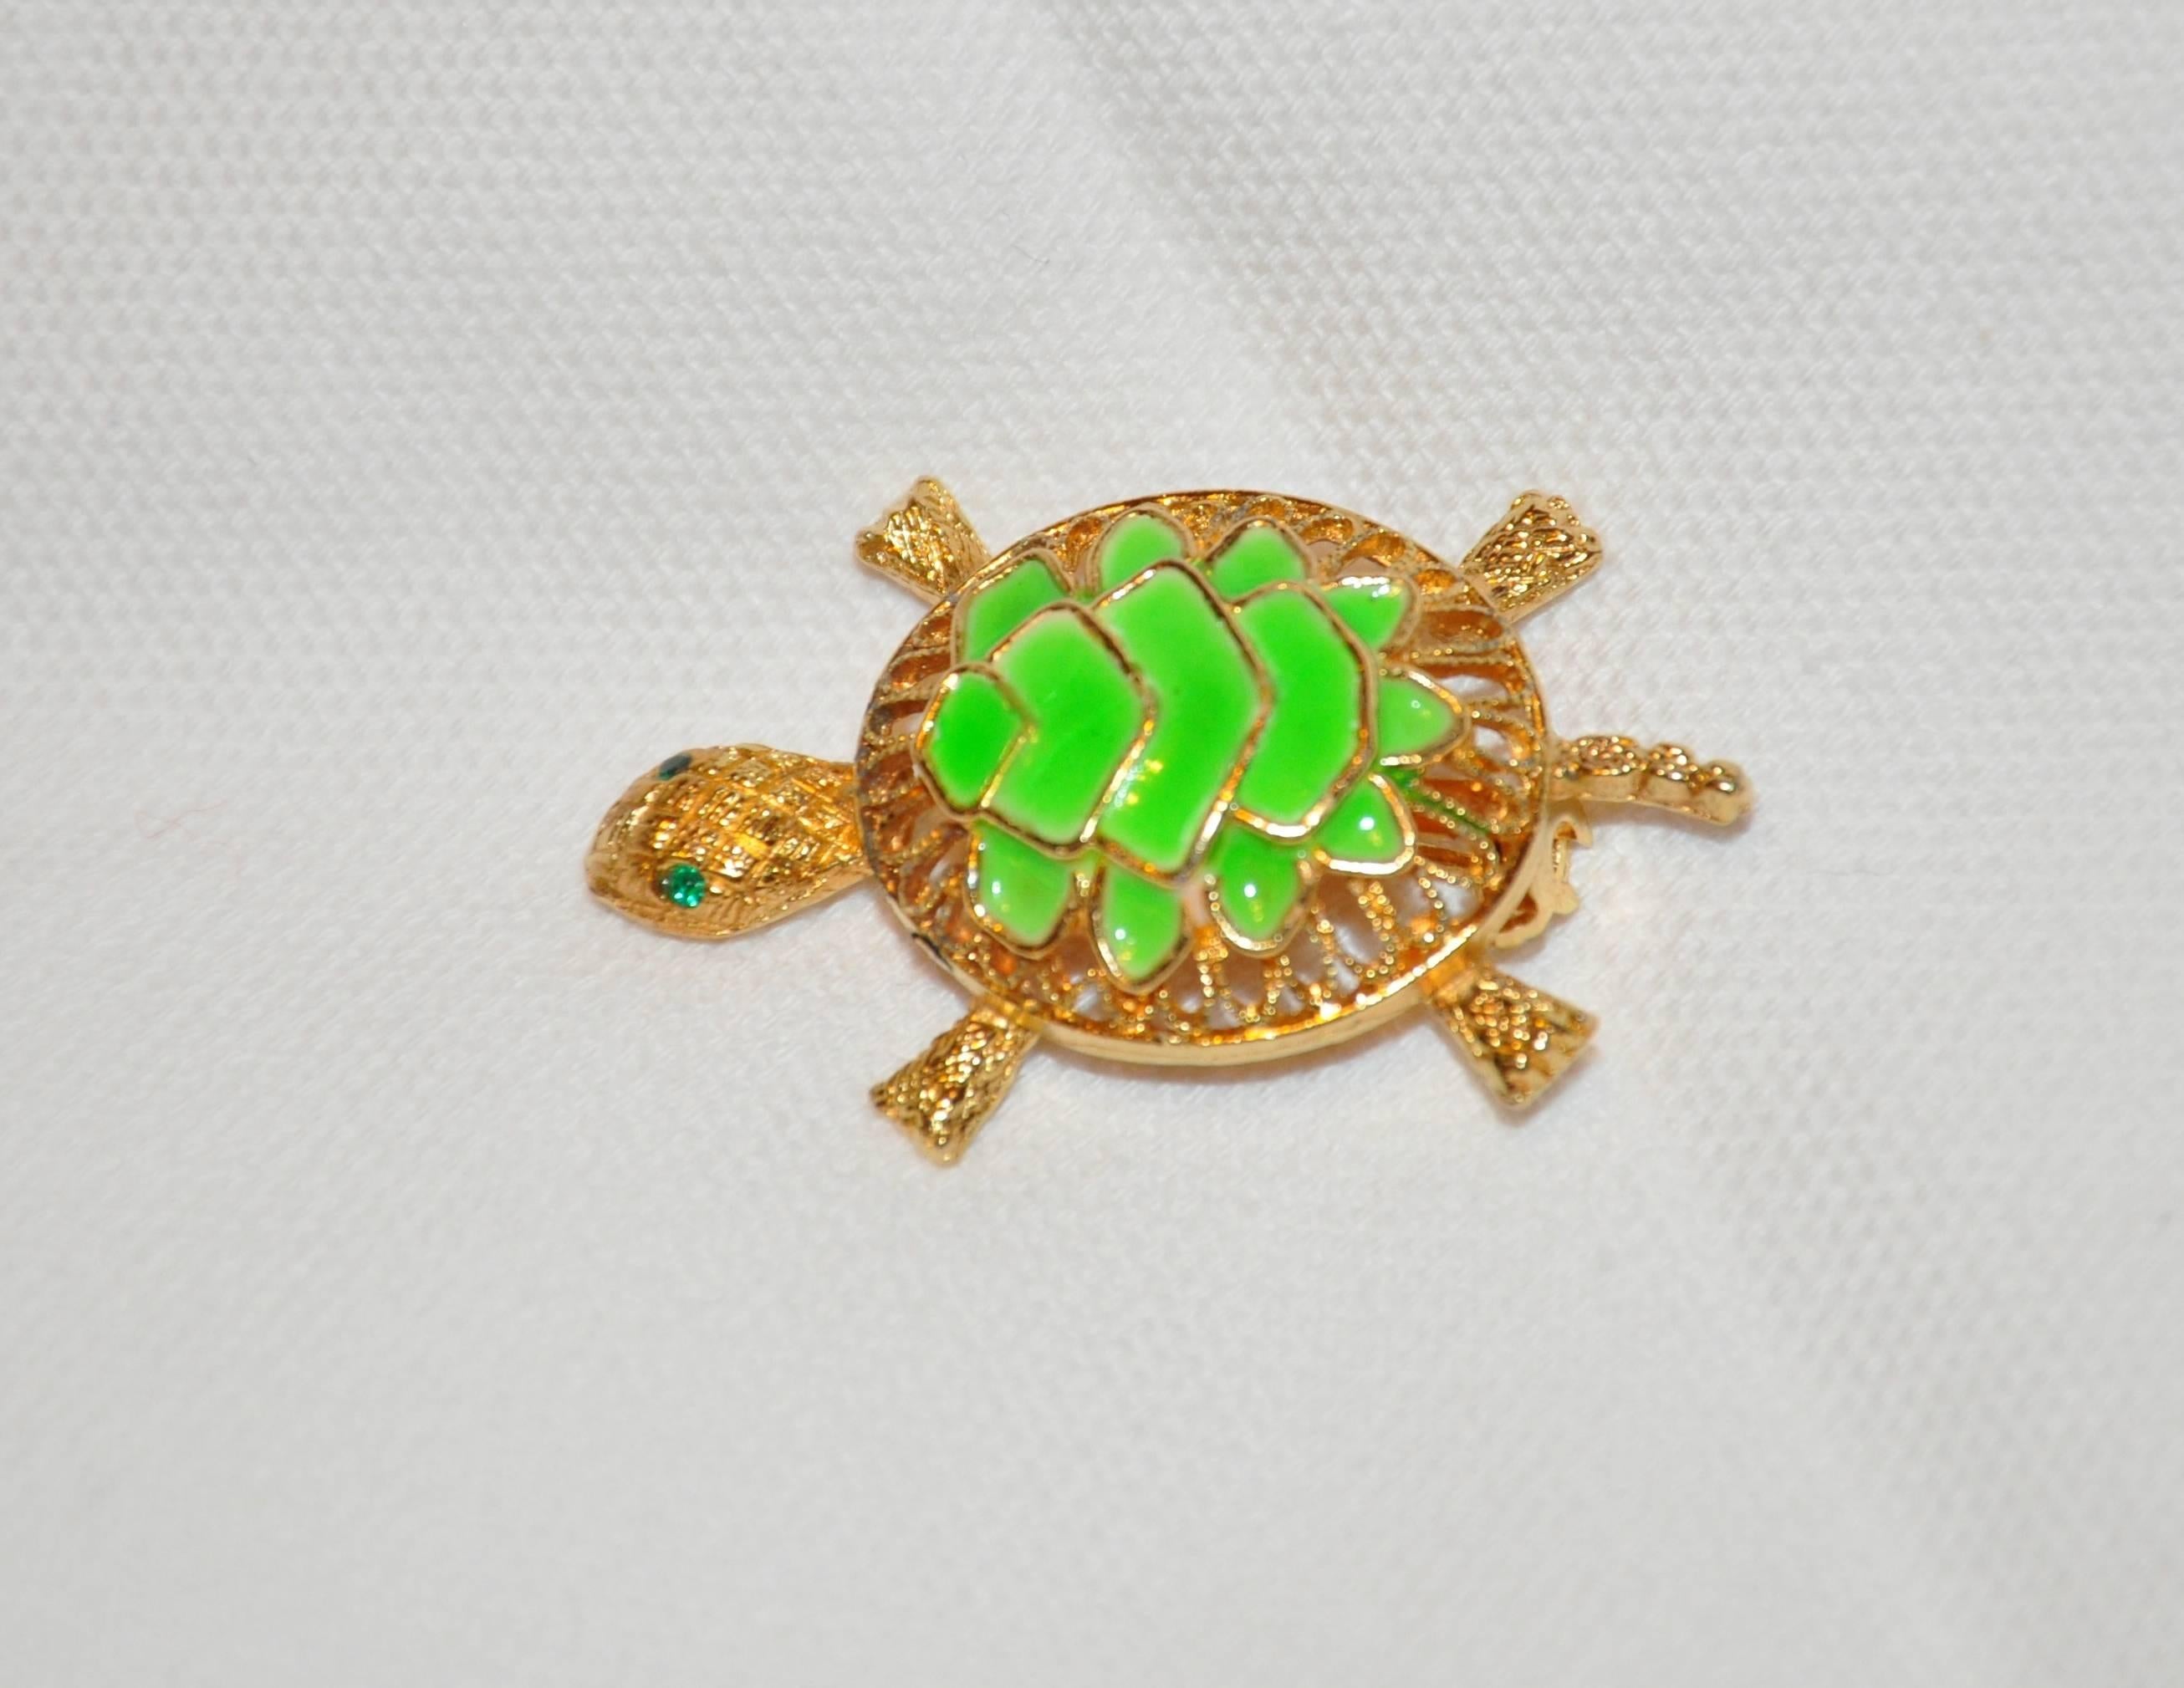        This wonderful whimsical polished gilded gold vermeil hardware "Turtle" brooch is accented with bold green enamel as well as faux emerald eyes. The length measures 1 1/4 inches, width measures 1 inch, depth is 1/2 inch. Made in US.